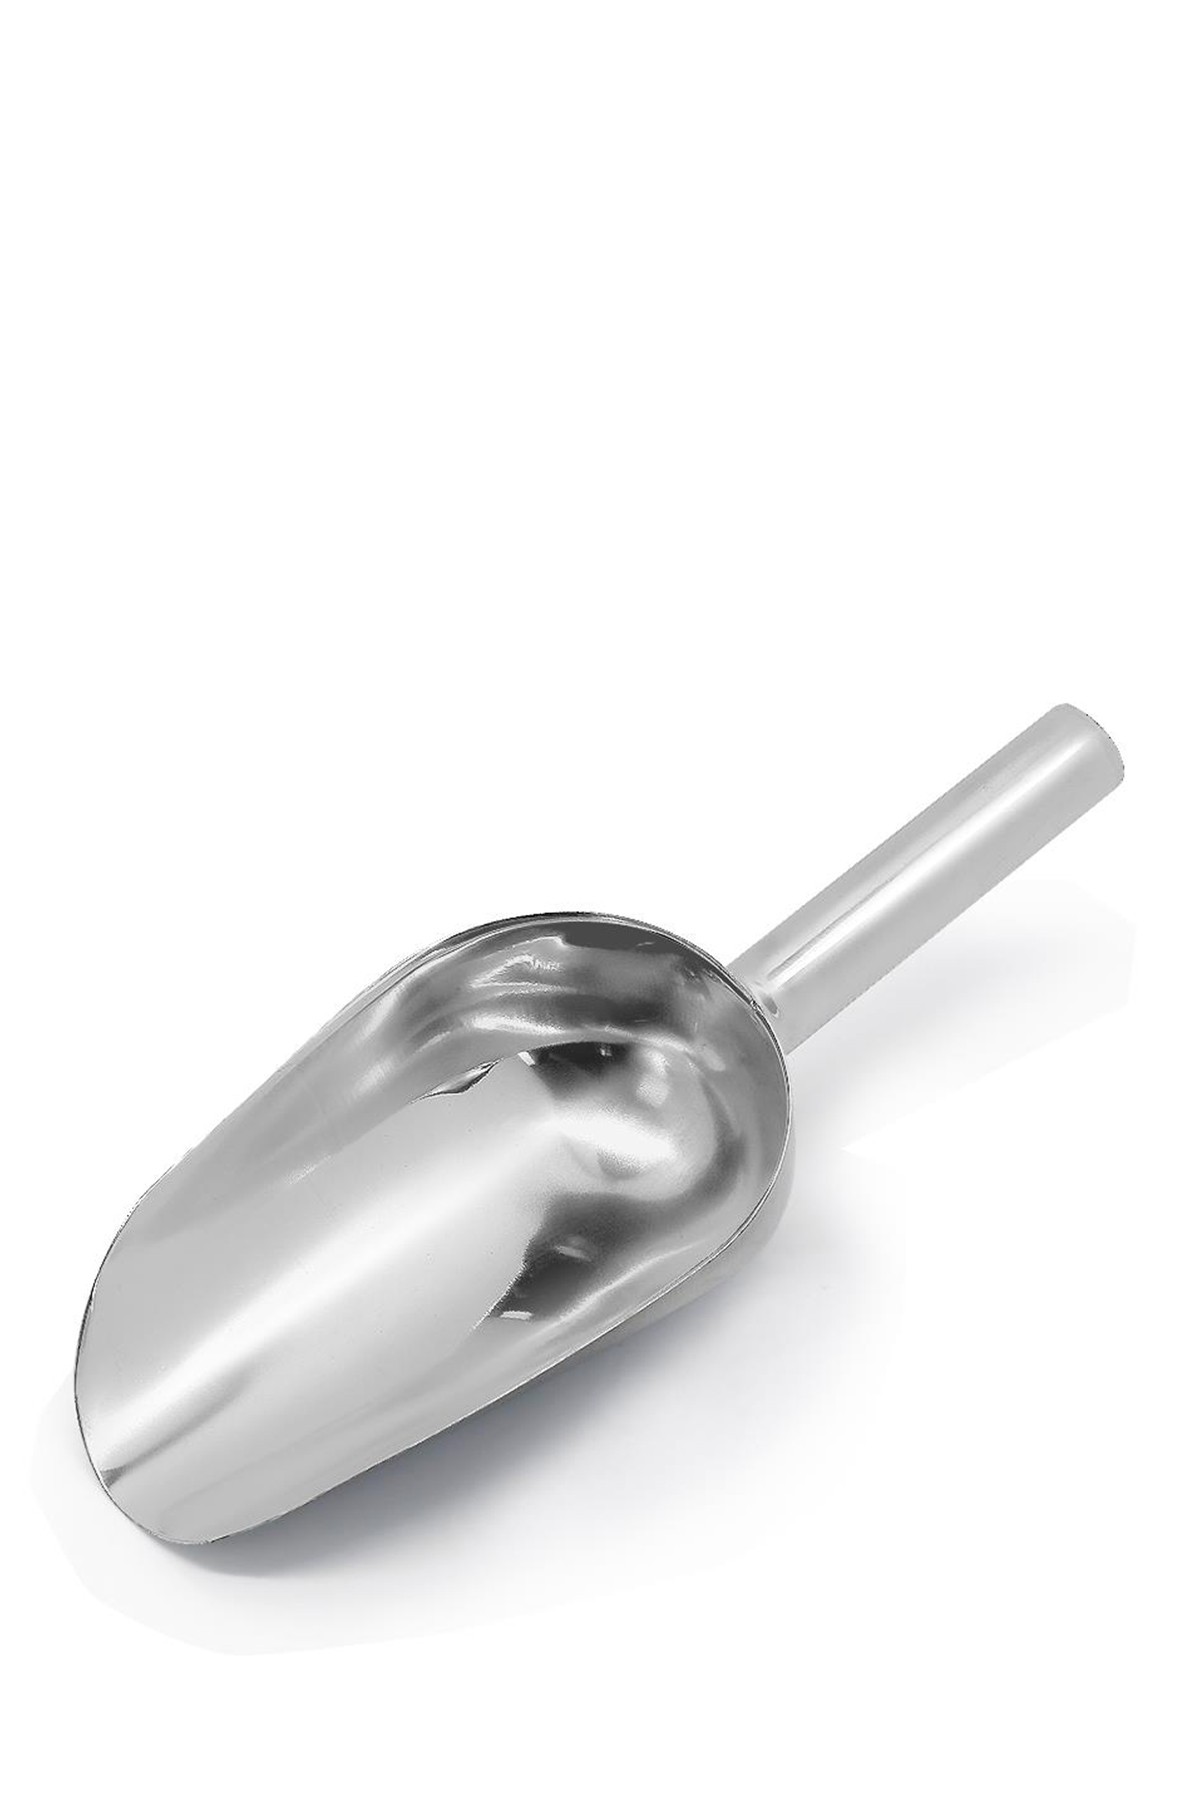 Stainless Steel Ice Scoop NutriChef